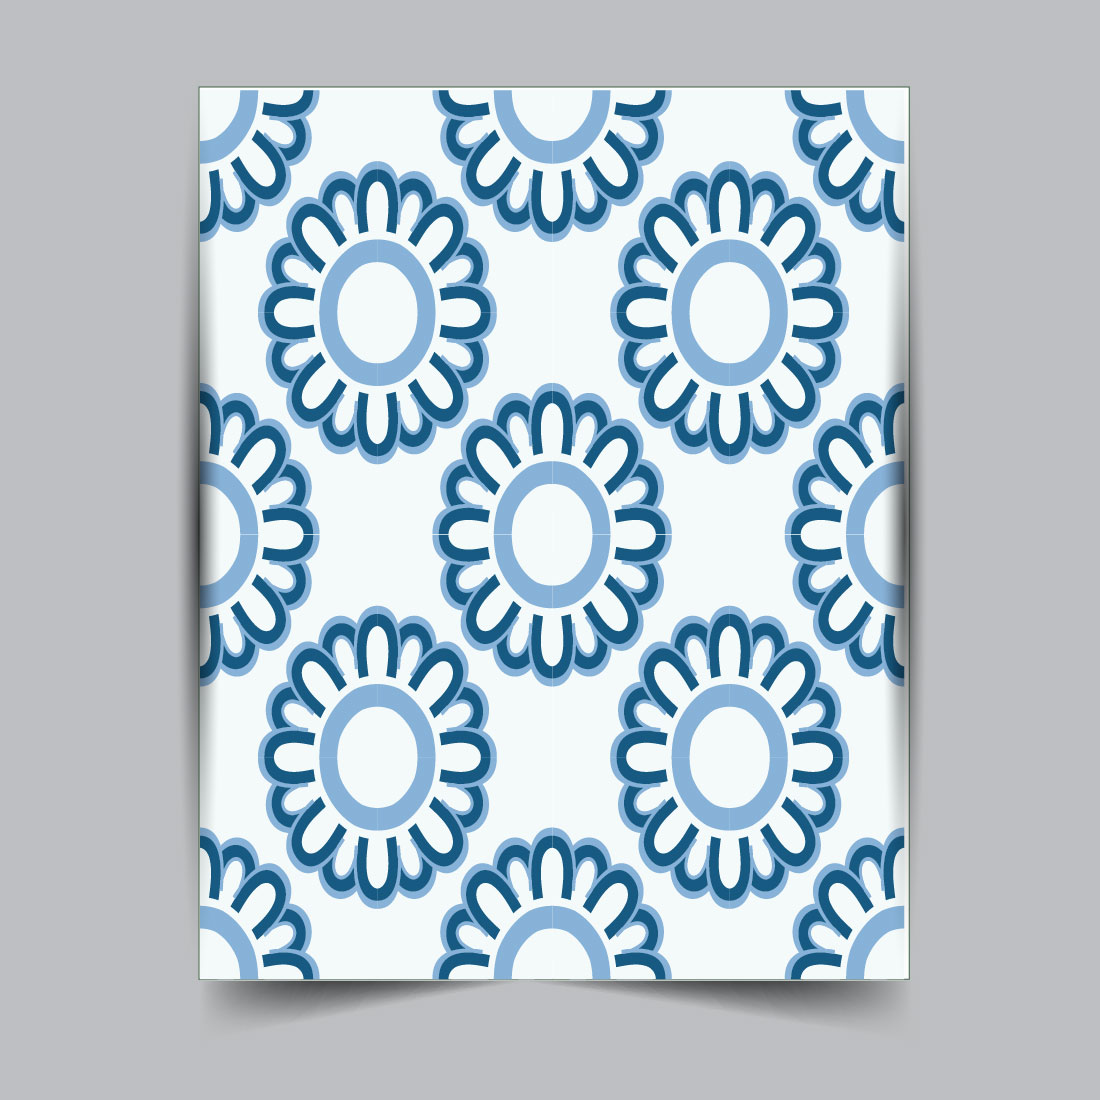 I Will Design Seamless Repeat Vector Patterns For Textile Prints cover image.